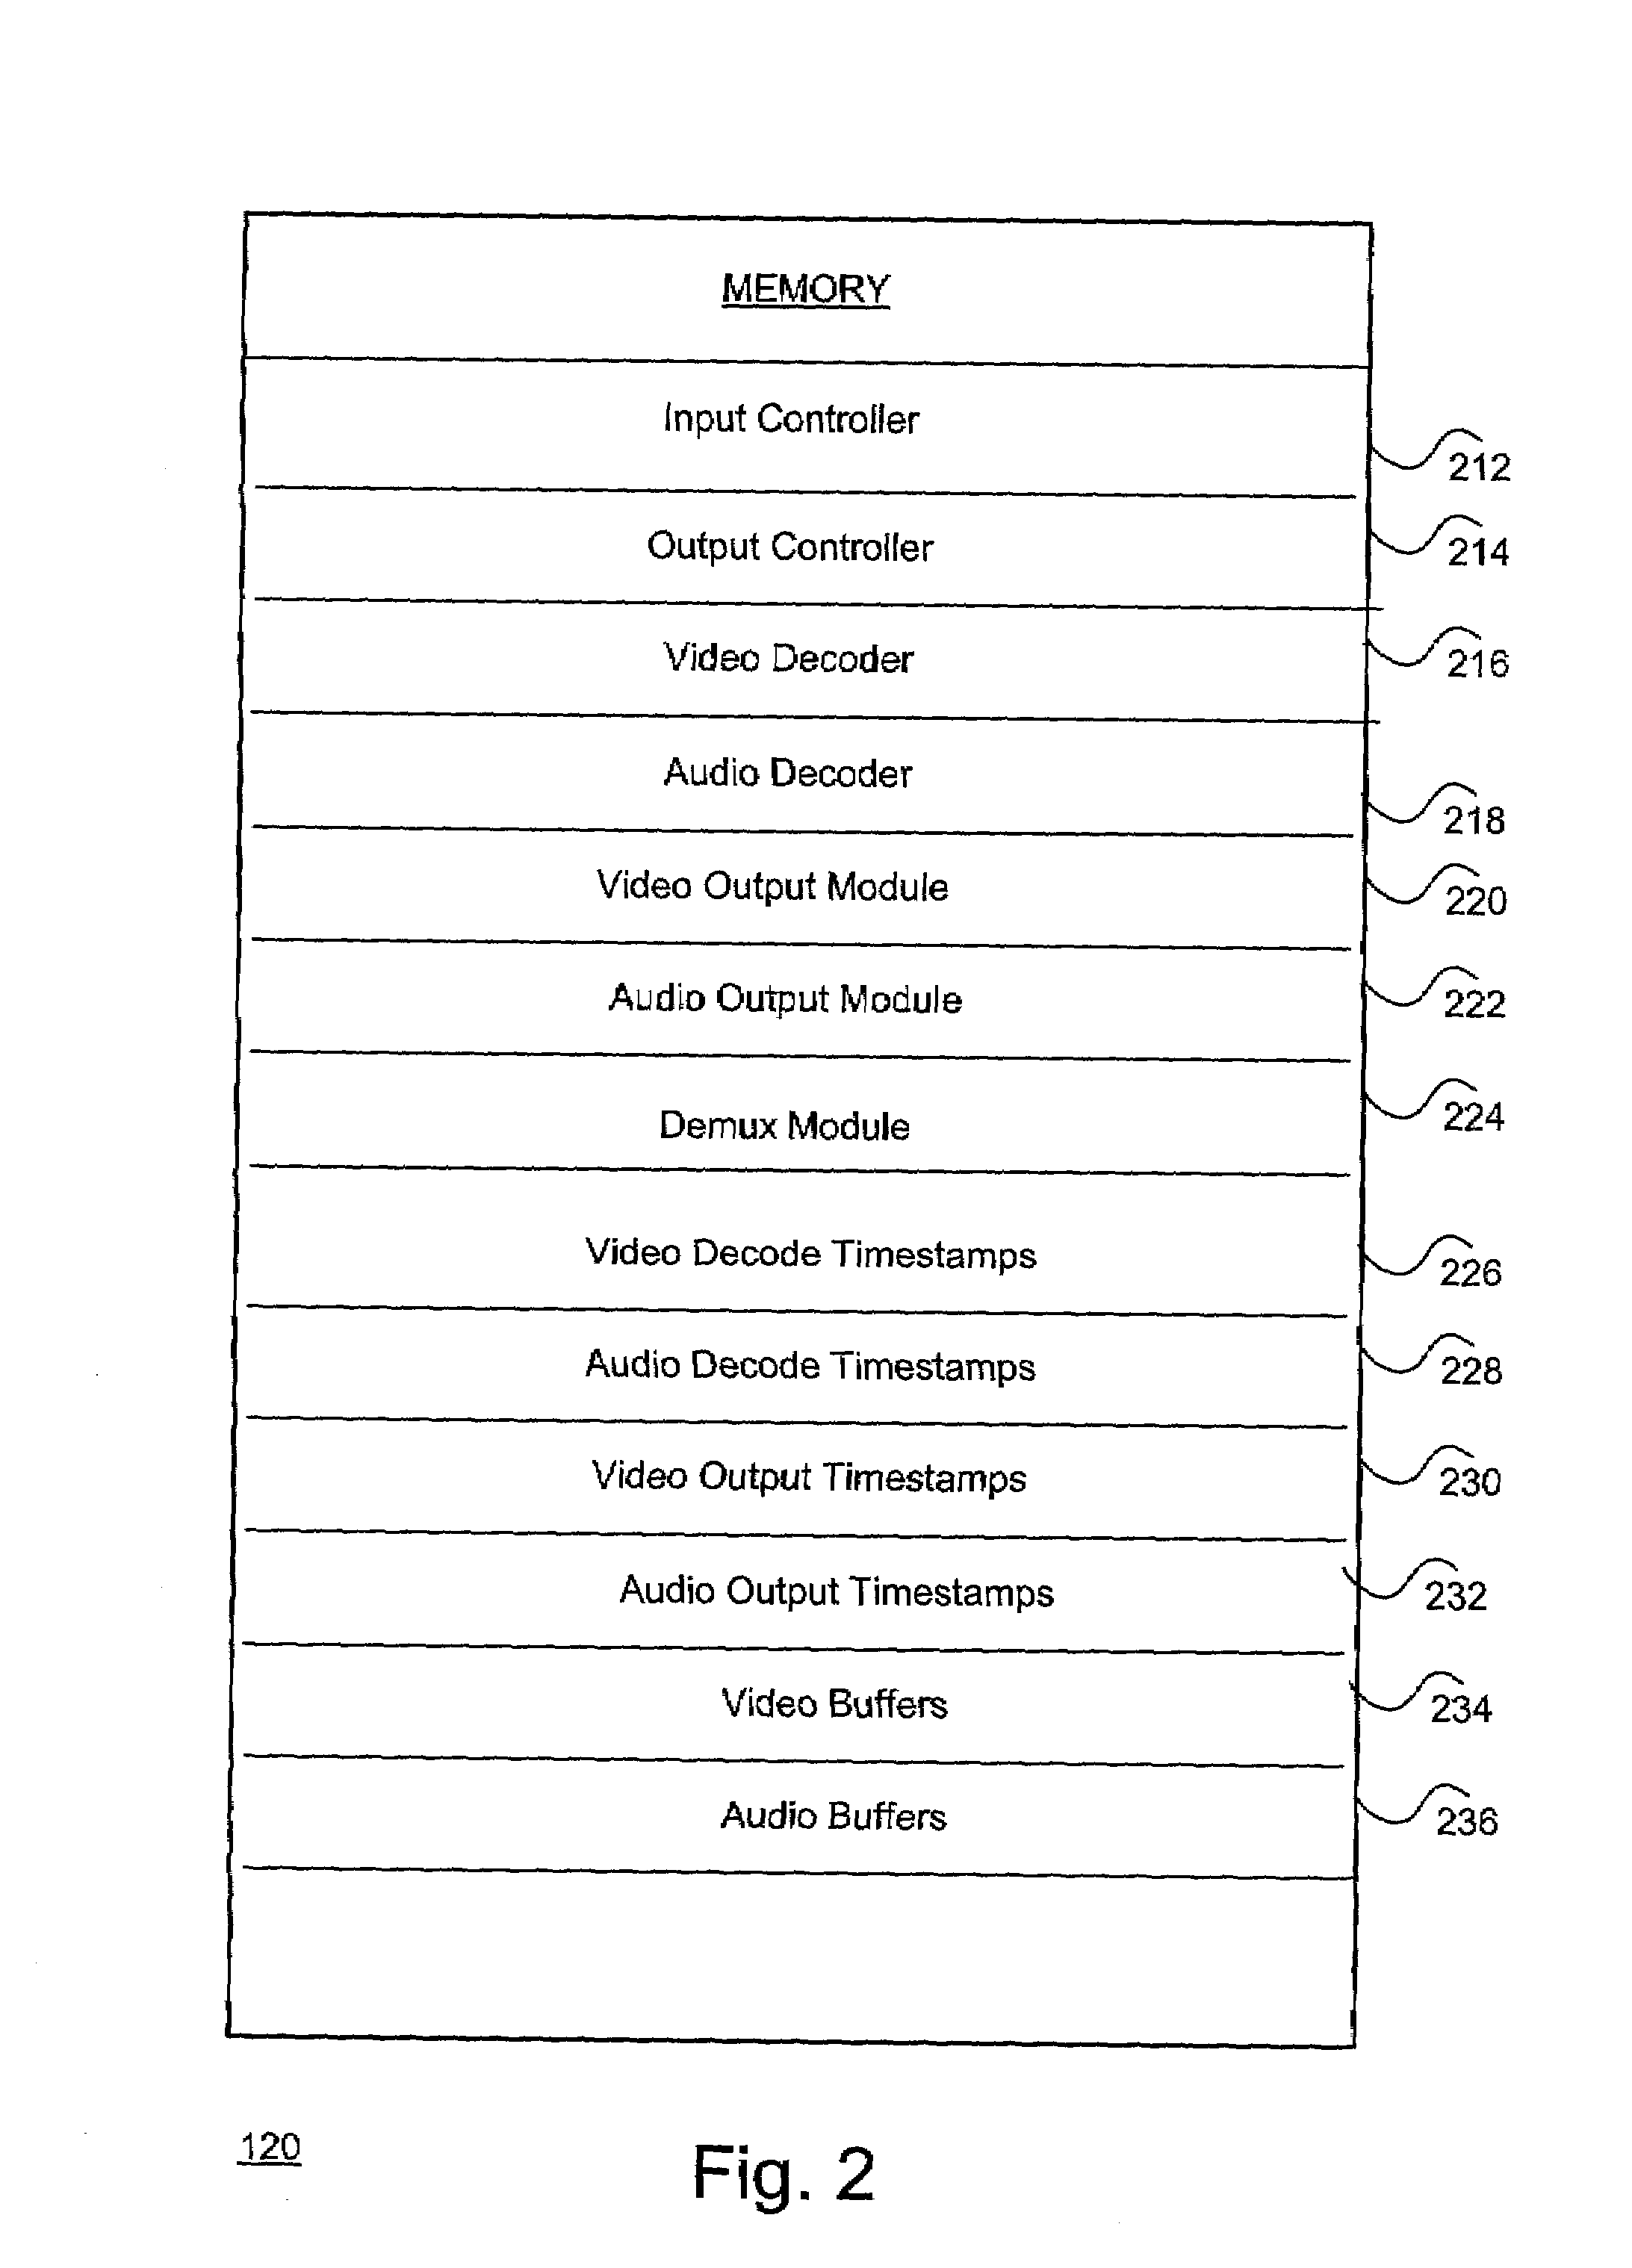 System and method for effectively performing an audio/video synchronization procedure